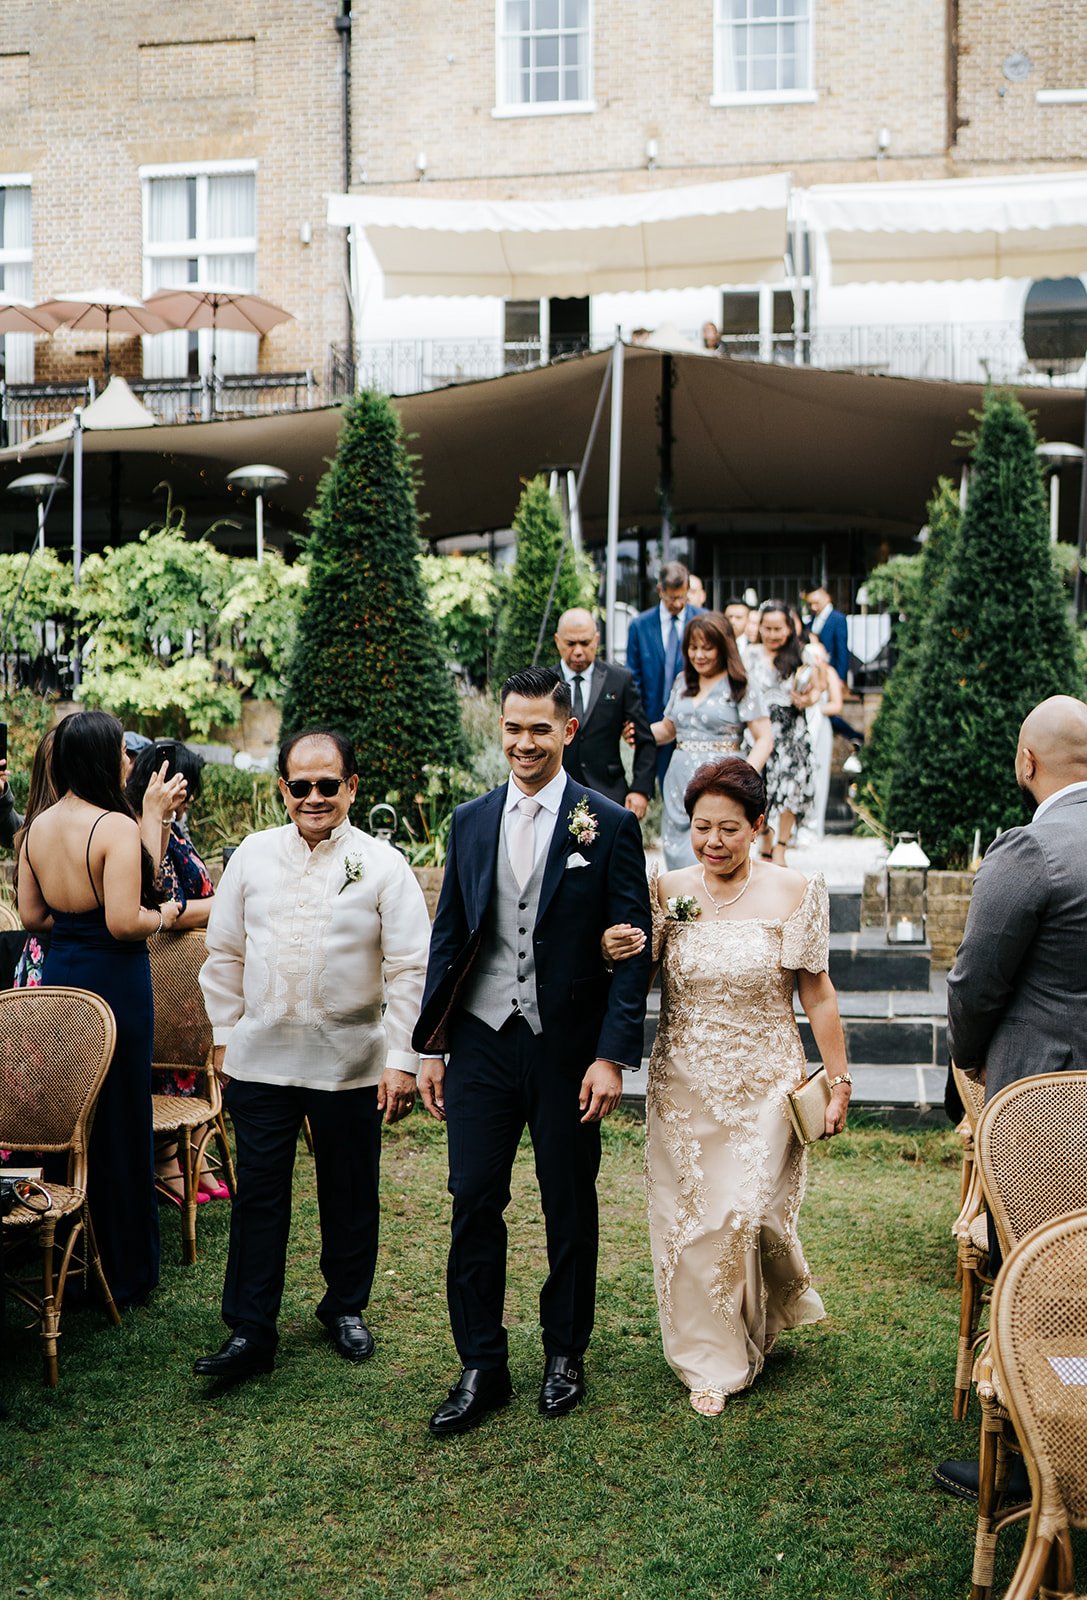 Groom walks down the aisle during outdoor ceremony at Bingham Riverhouse and is flanked by his mother and father